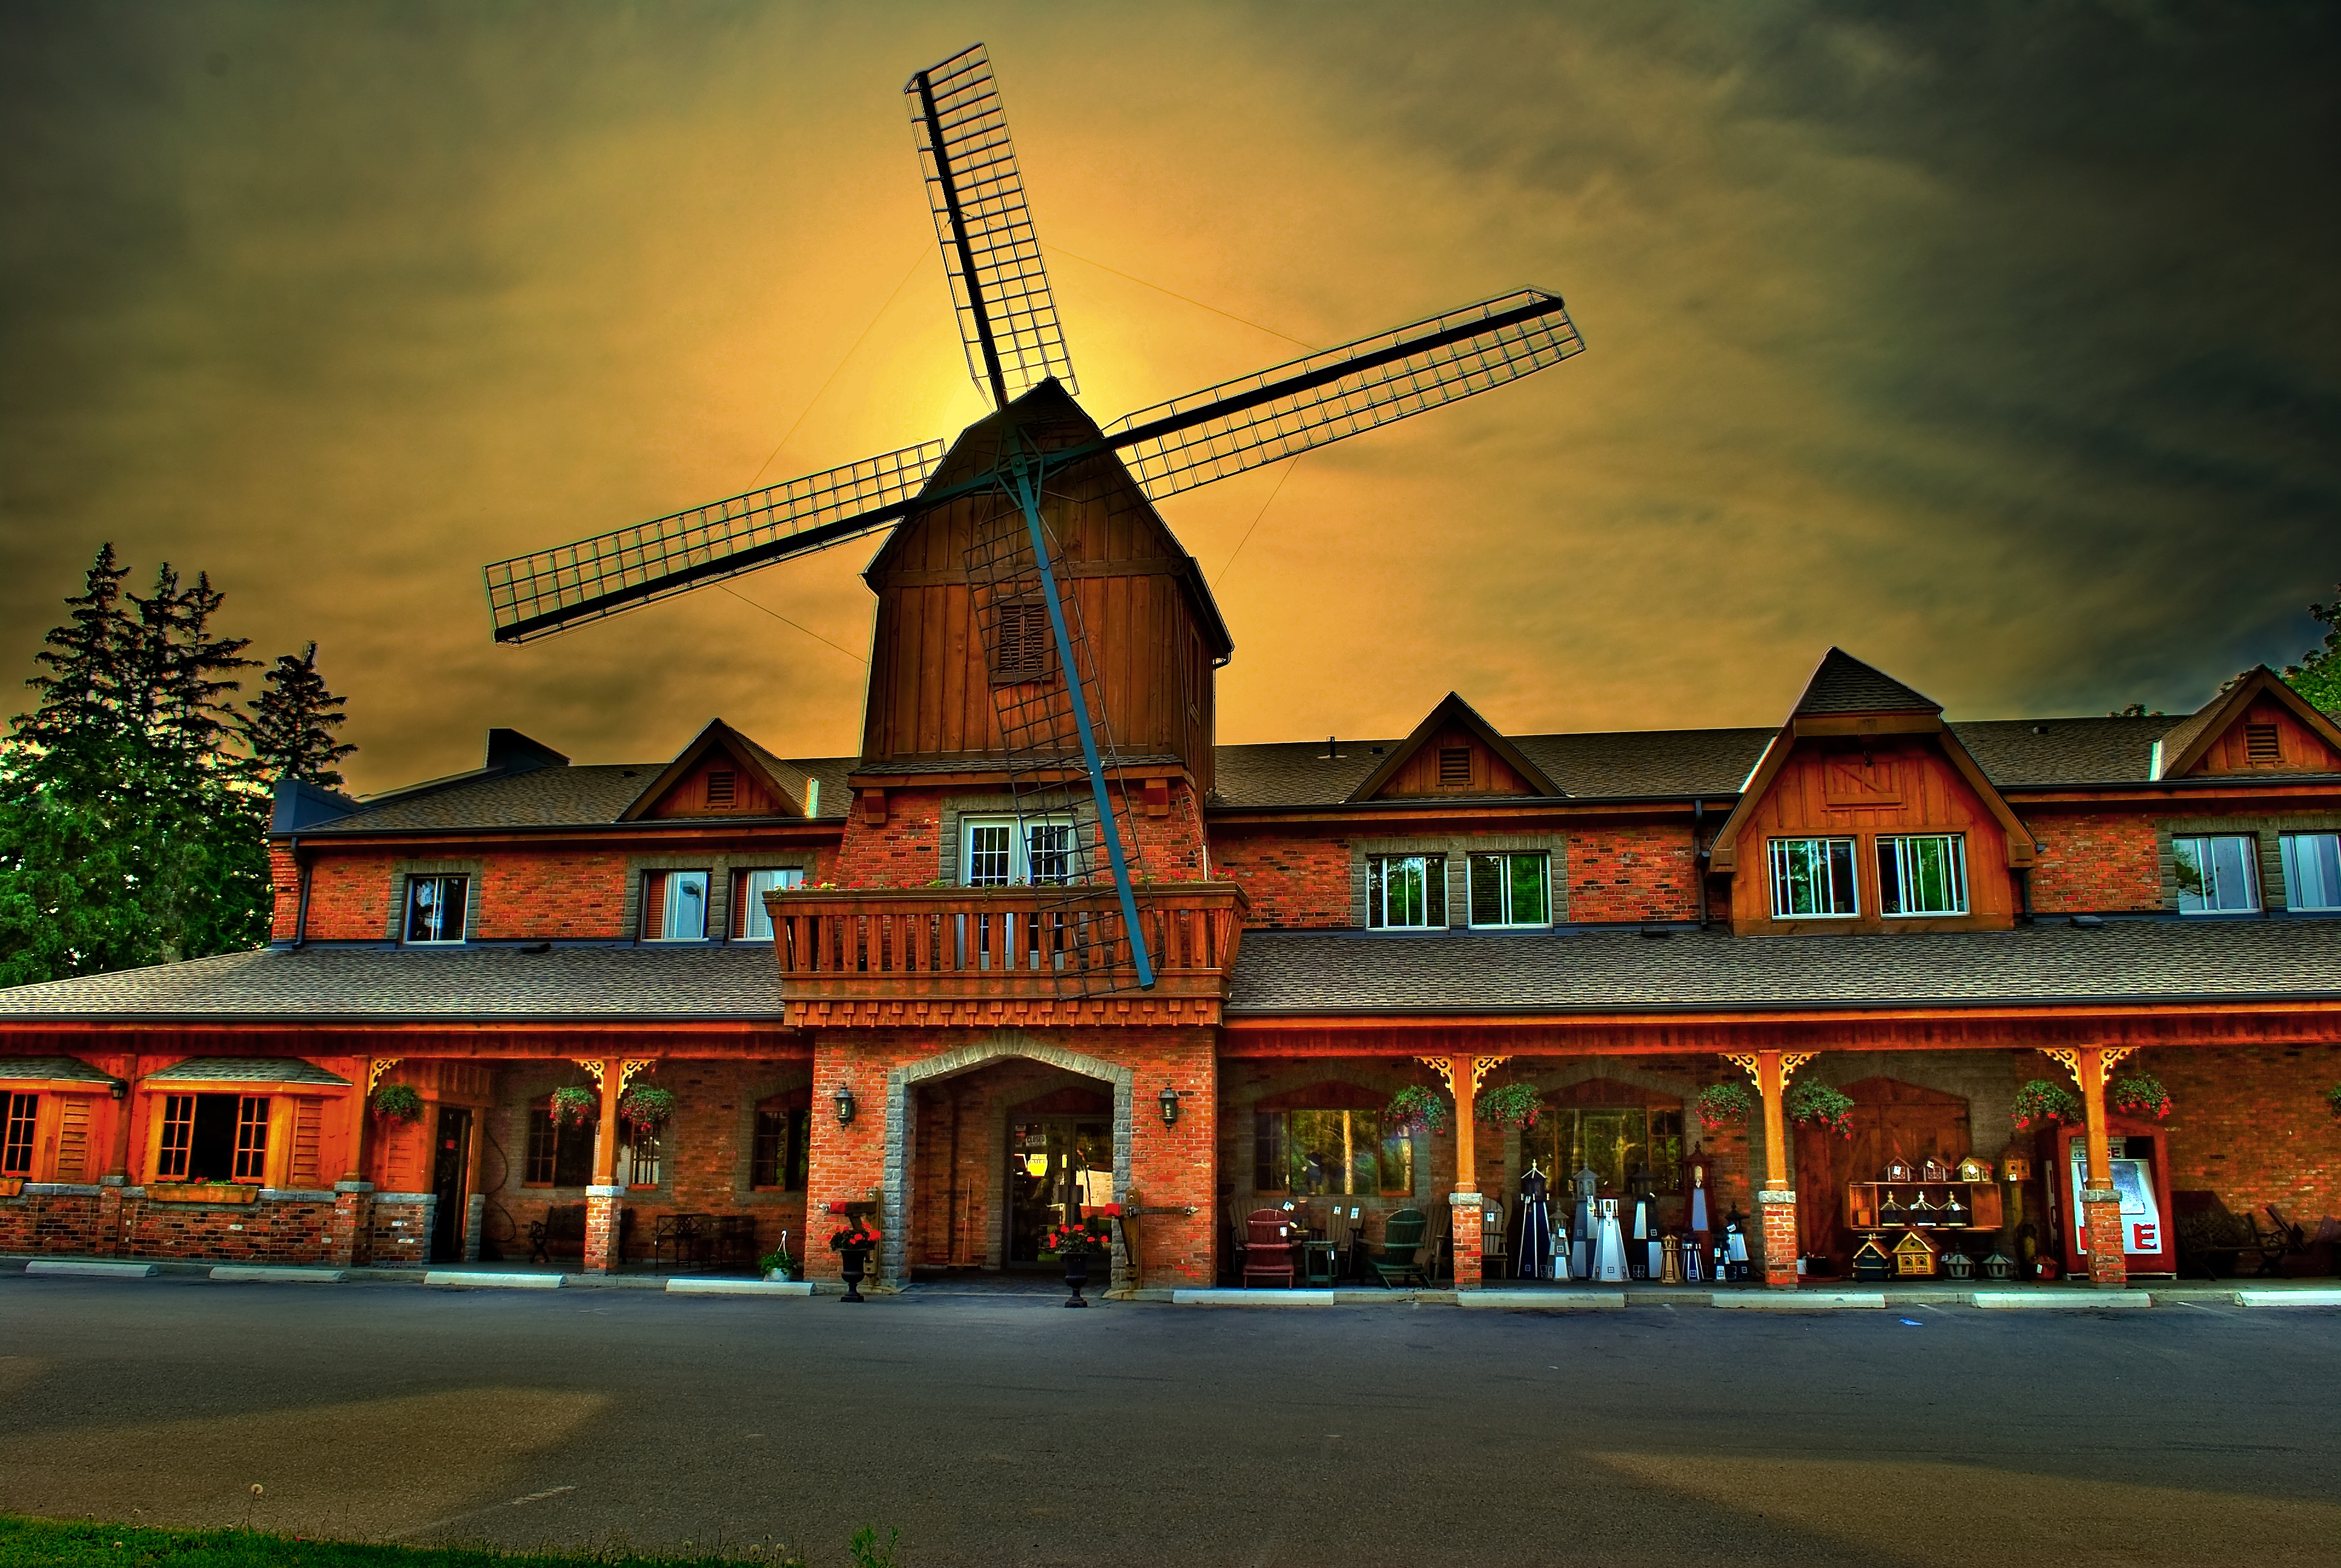 Mt. Pleasant Dutch Windmill, Bakery, Building, Colorful, Evening, HQ Photo